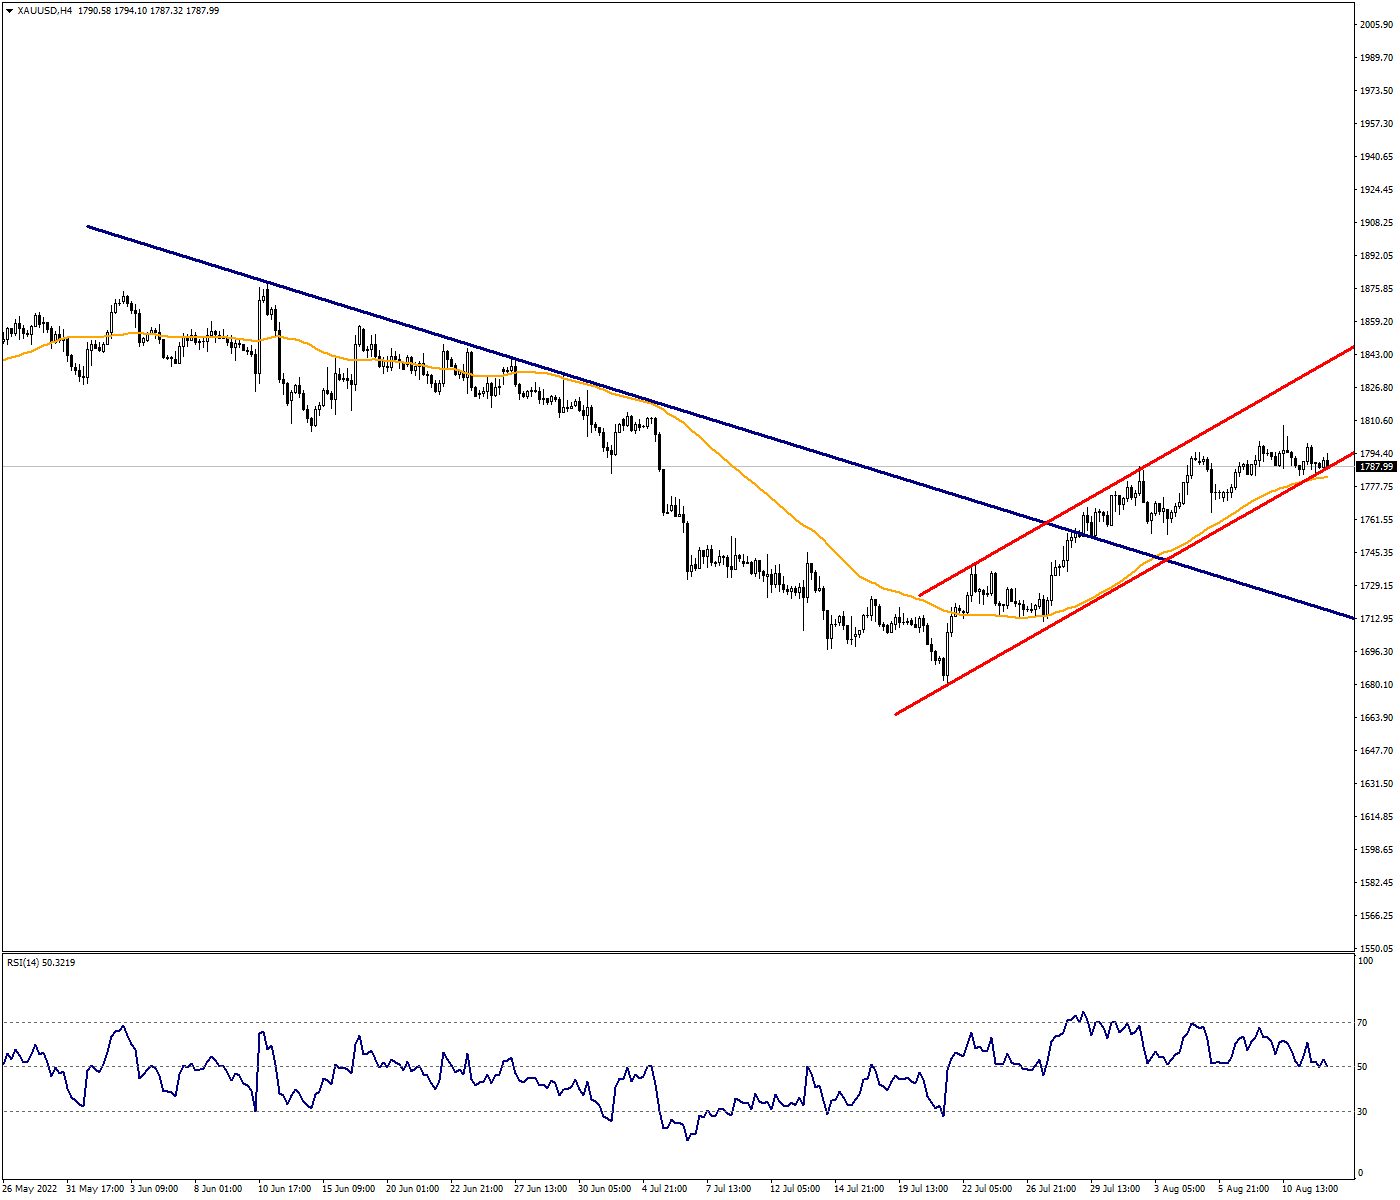 Ounce Gold Maintains Ascending Channel Movement